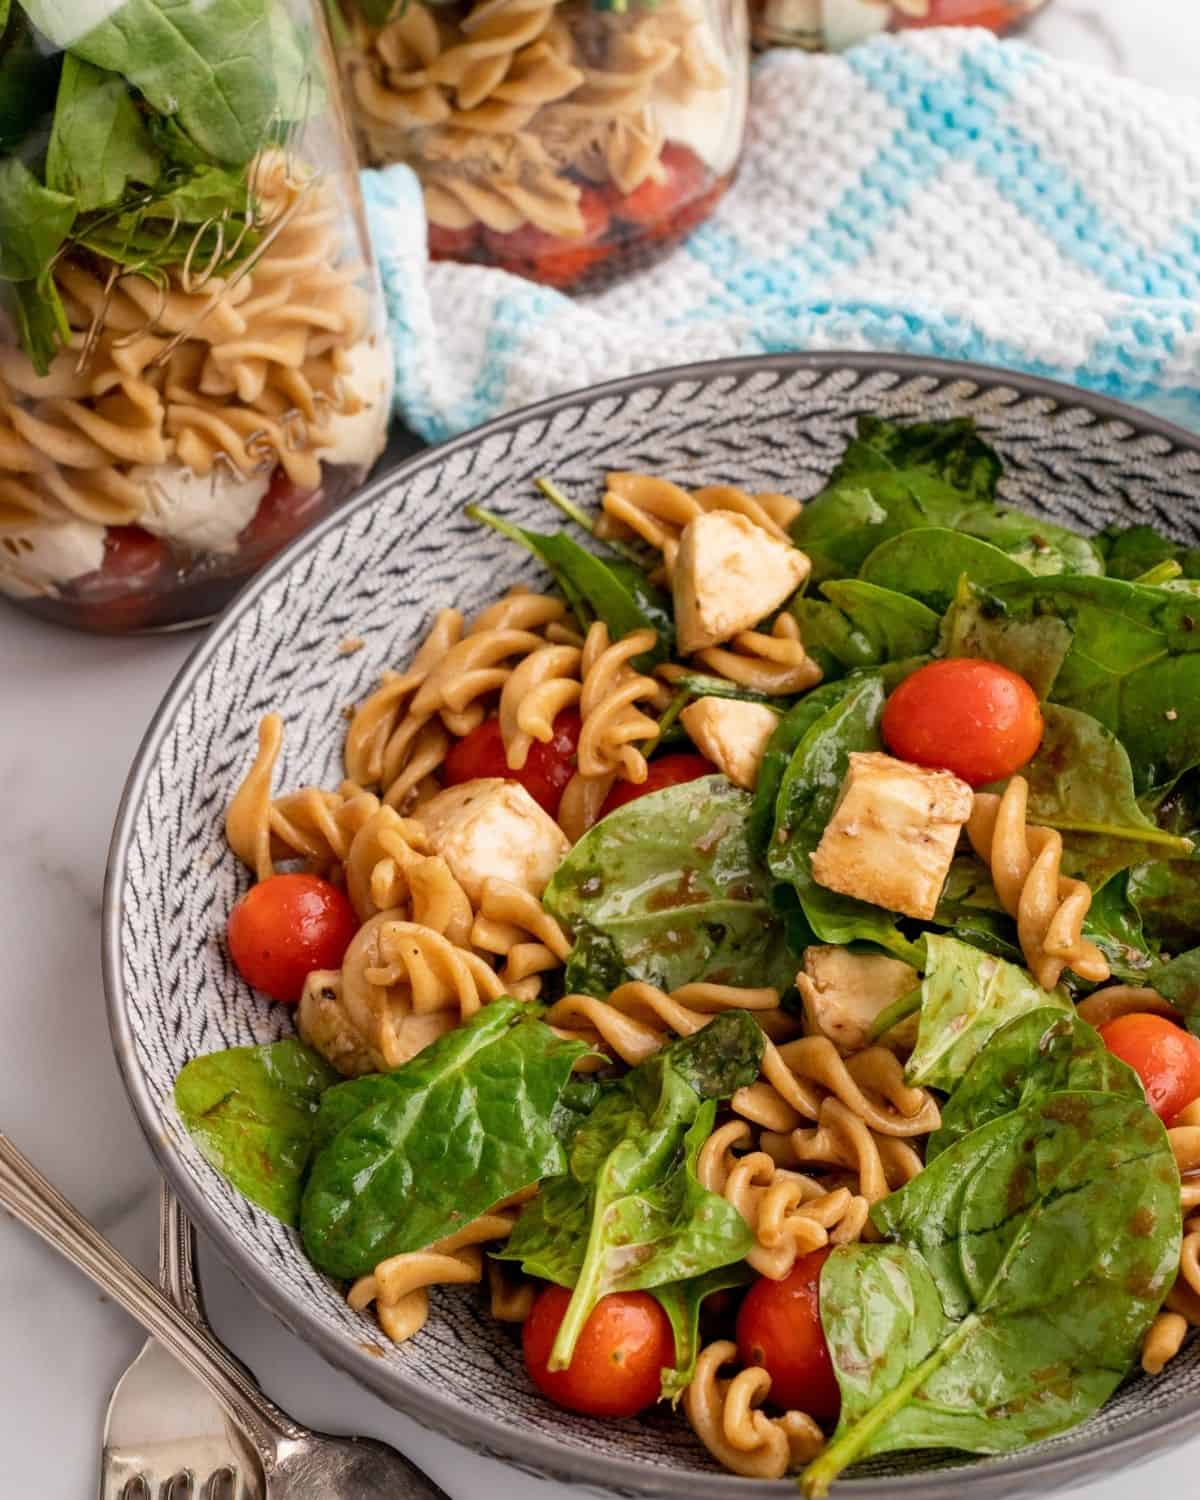 spinach pasta salad with pieces of fresh mozzarella and tomatoes.